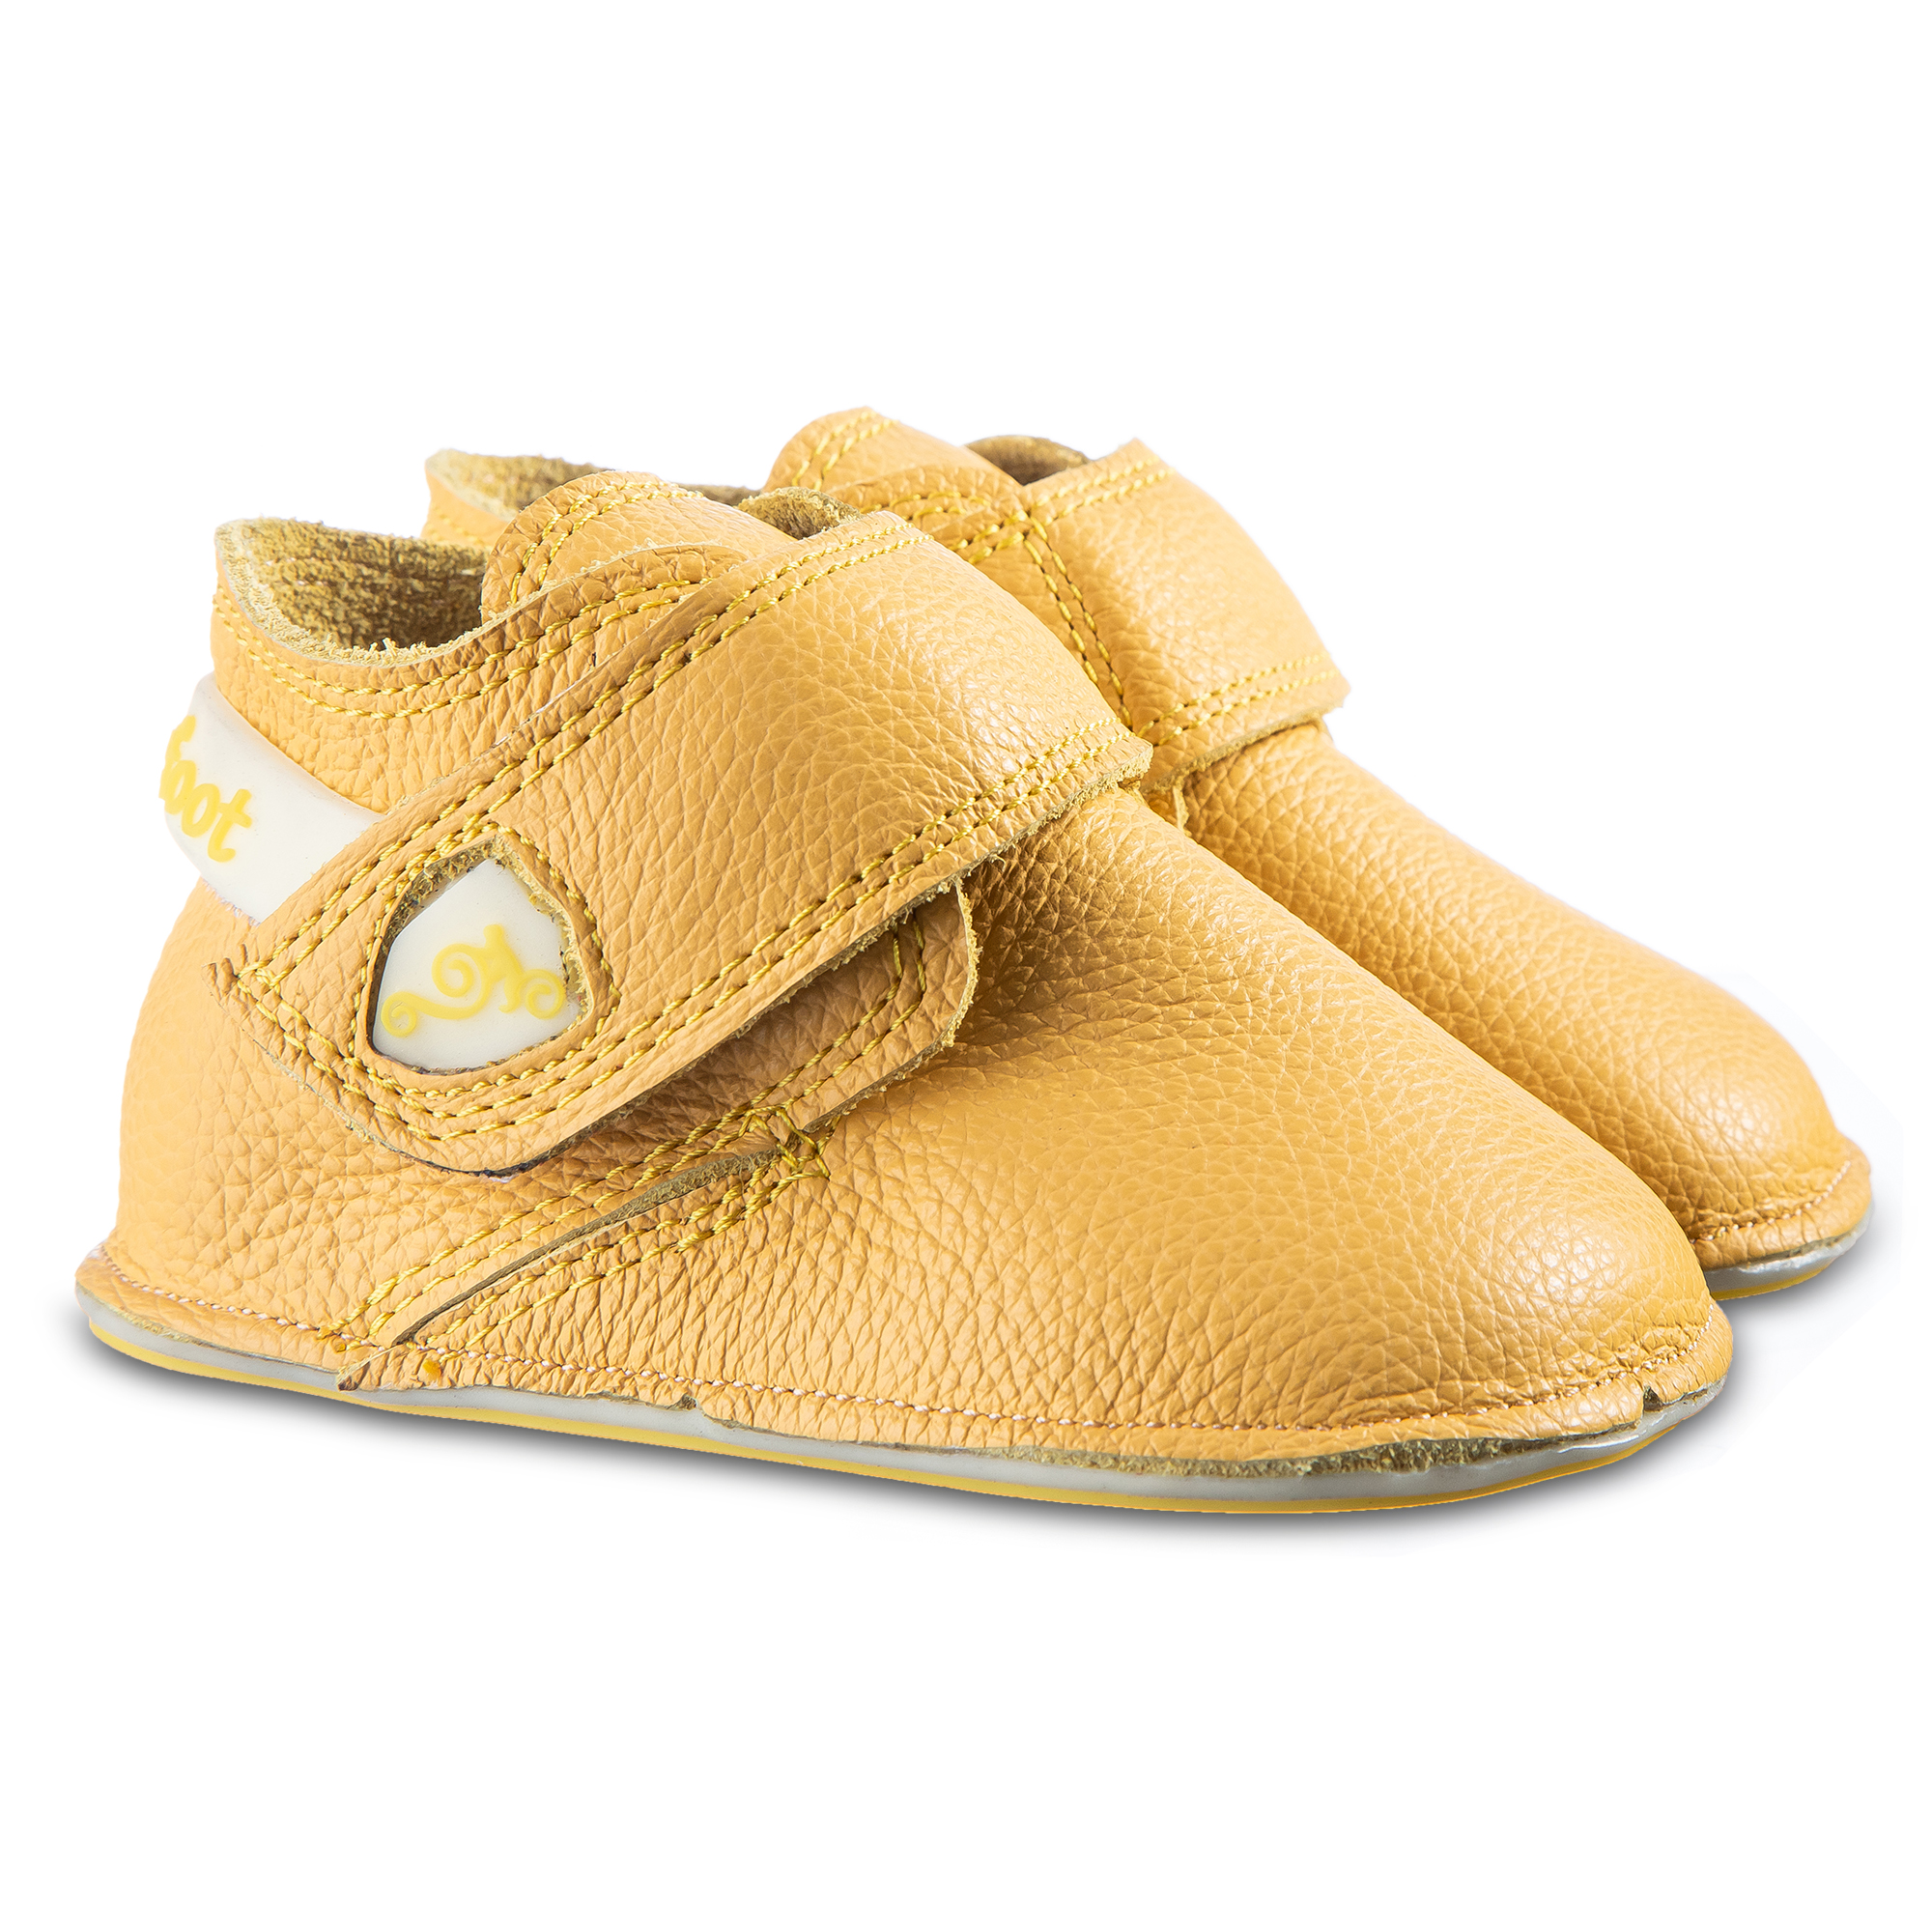 Baby Barefoot Sandals First Walking Shoes Slippers 